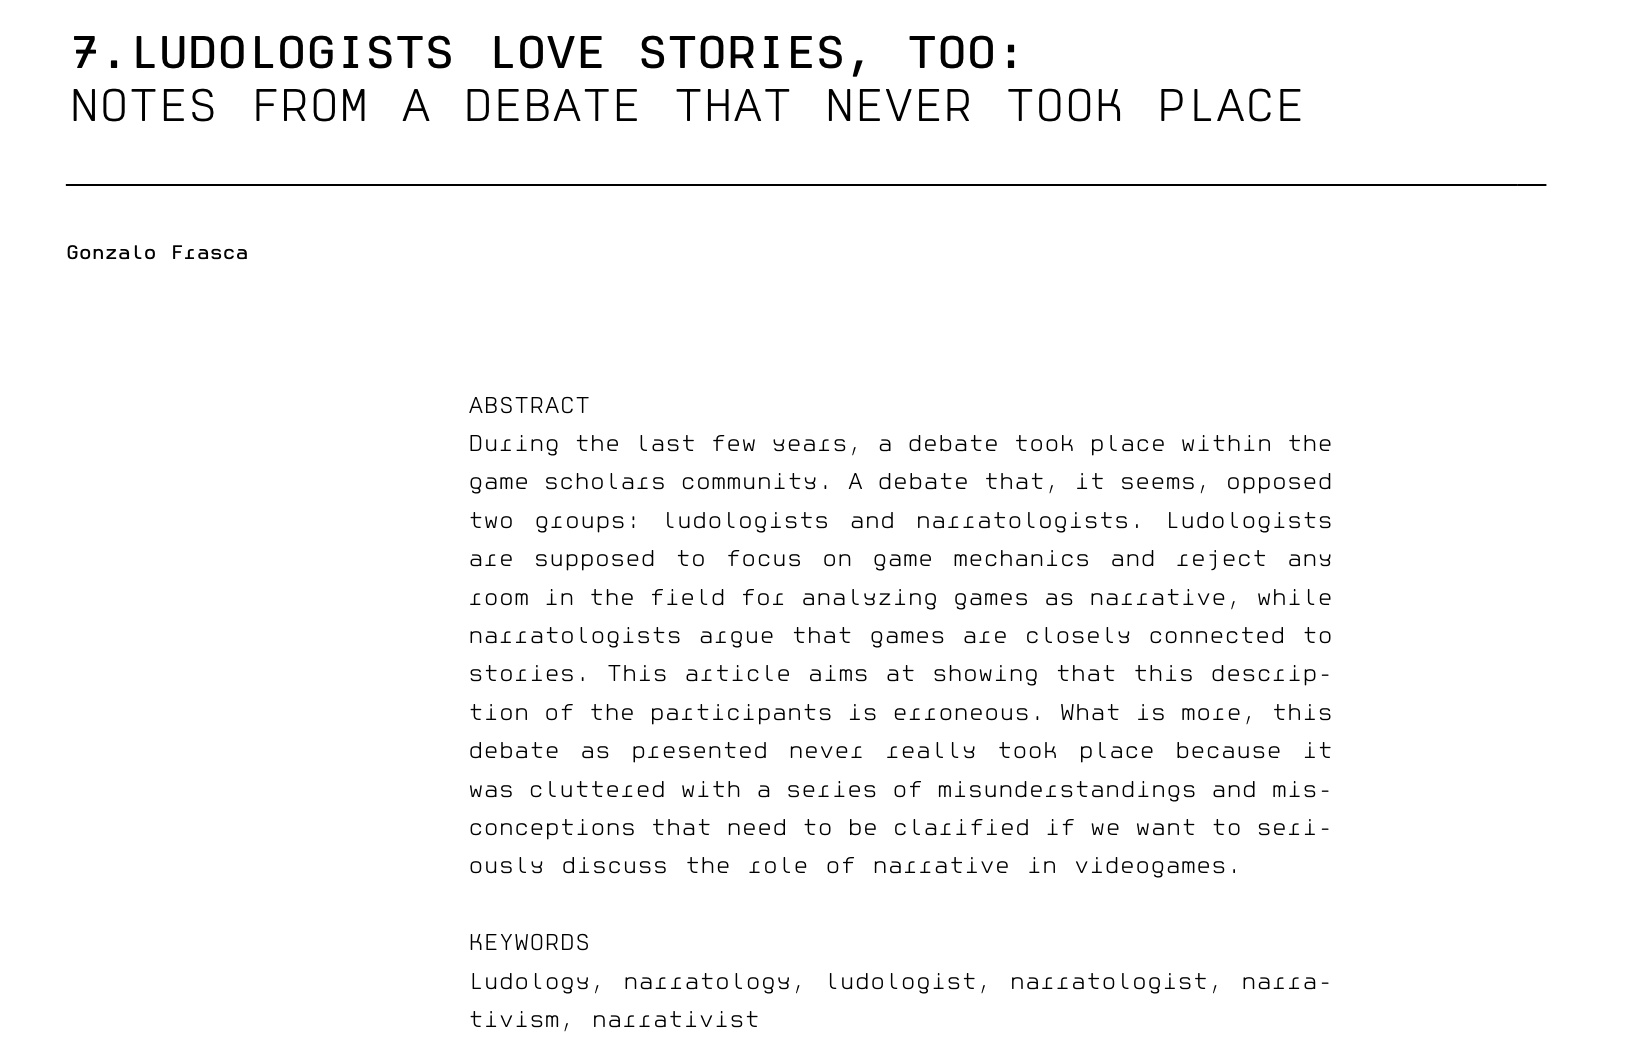 Frasca, Gonzalo. "Ludologists love stories, too: Notes from a debate that never took place." DiGRA conference. Vol. 8. 2003.